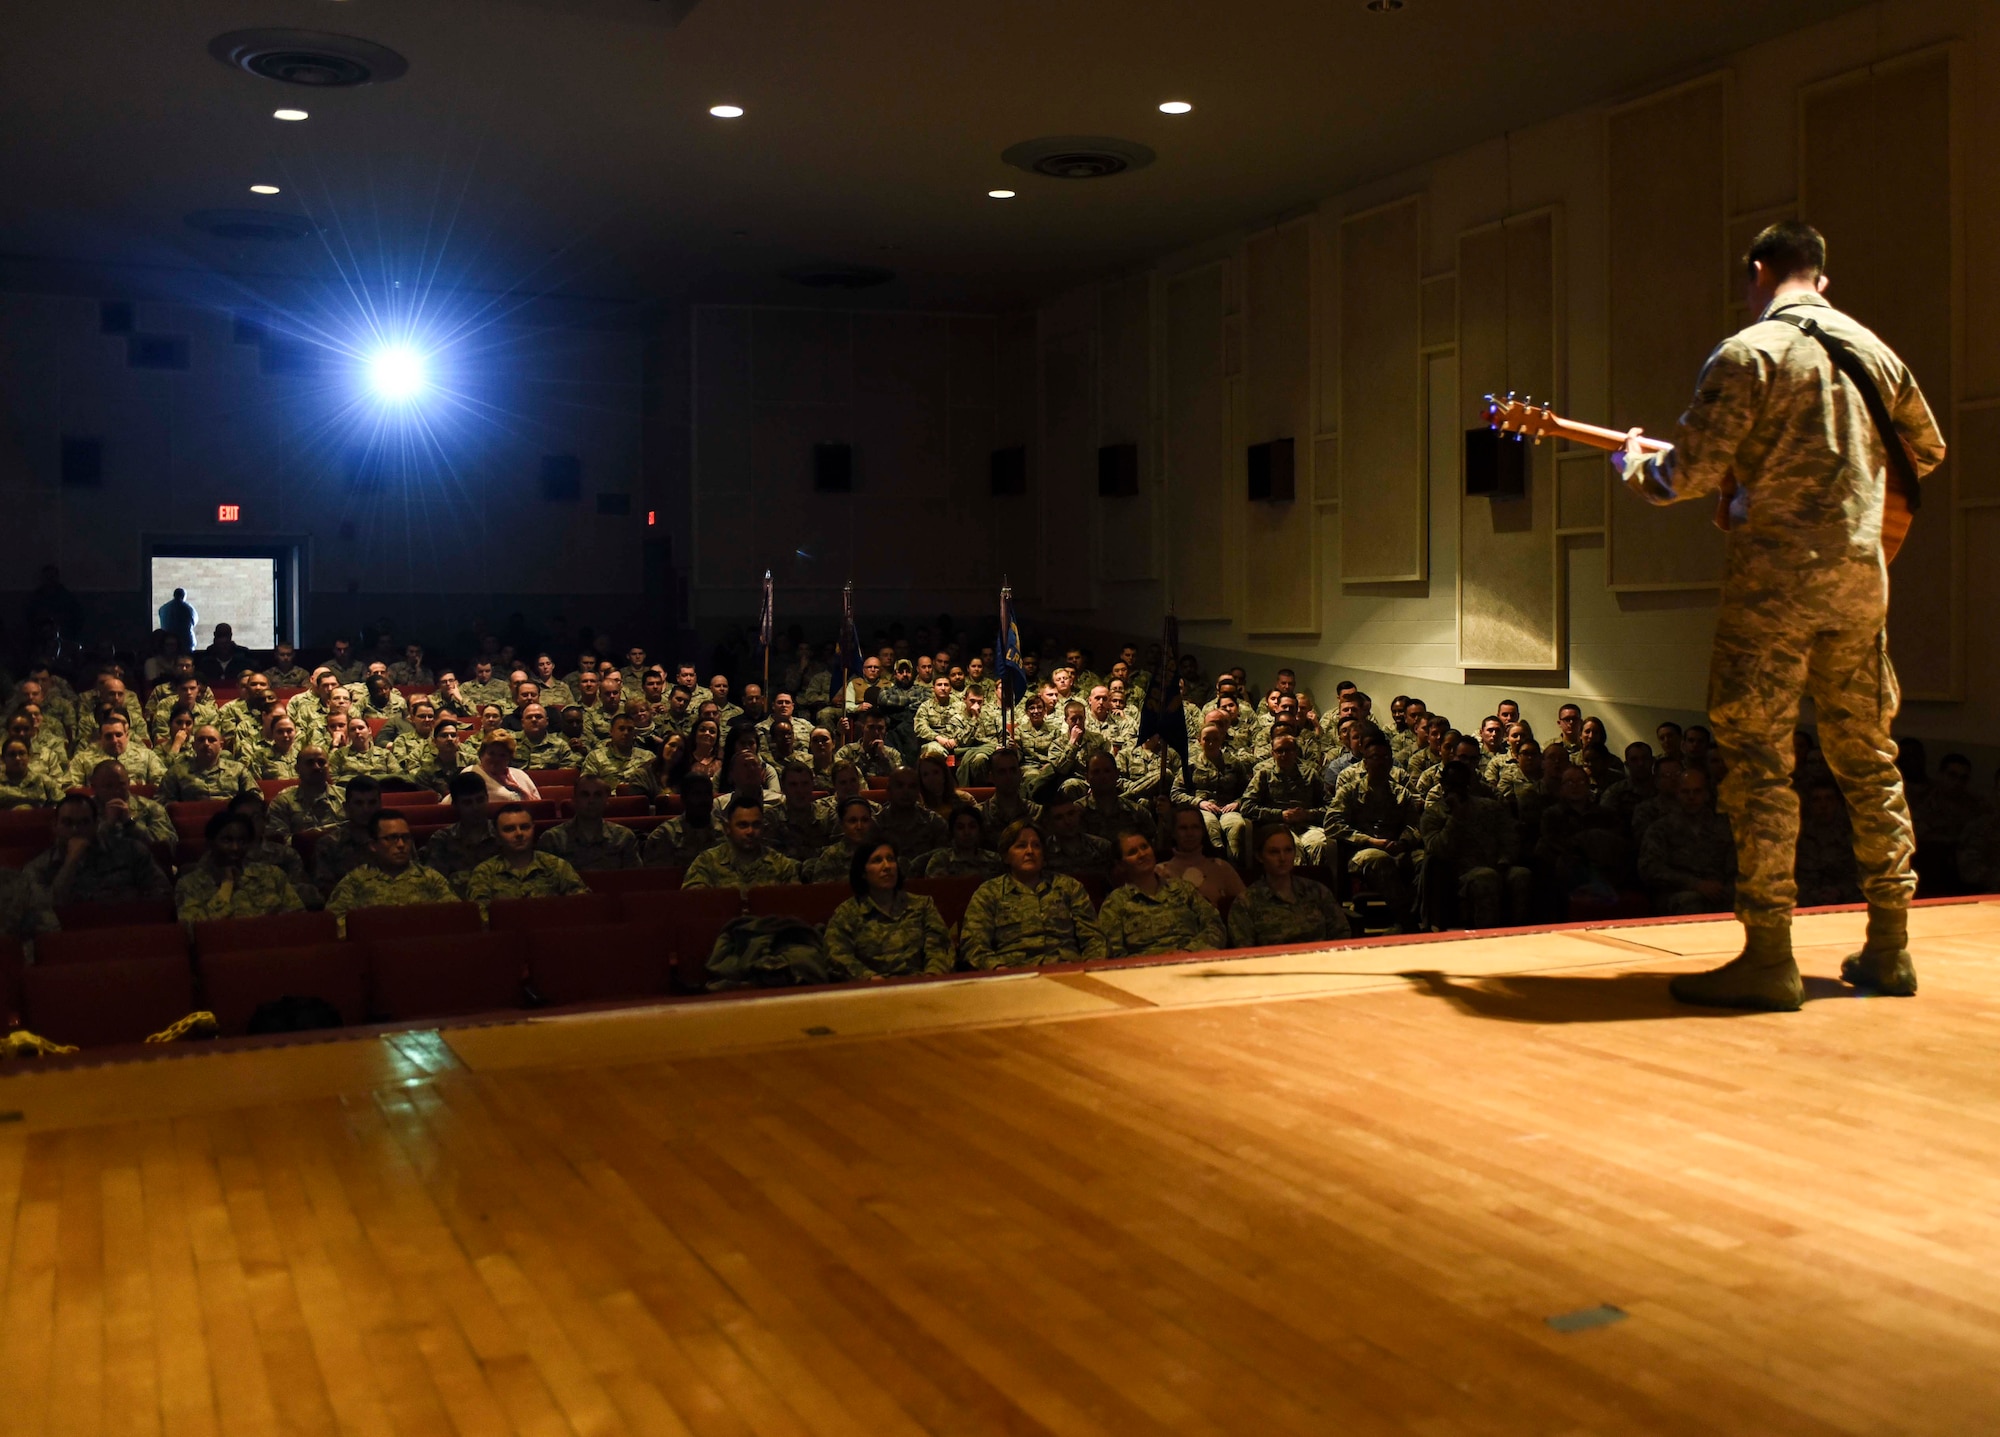 Senior Airman James Pratt, a heavy equipment operator assigned to the 28th Civil Engineer Squadron, performs John Mayer’s “Age of Worry” in front of the 28th Mission Support Group inside the base theater during their annual awards ceremony, Jan. 26, 2017, at Ellsworth Air Force Base, S.D. Four days later, Pratt was announced the Air Force Entertainer of the Year and was congratulated by Col. Gentry Boswell, the commander of the 28th Bomb Wing, in a coining ceremony. (U.S. Air Force photo by Airman 1st Class Randahl J. Jenson)